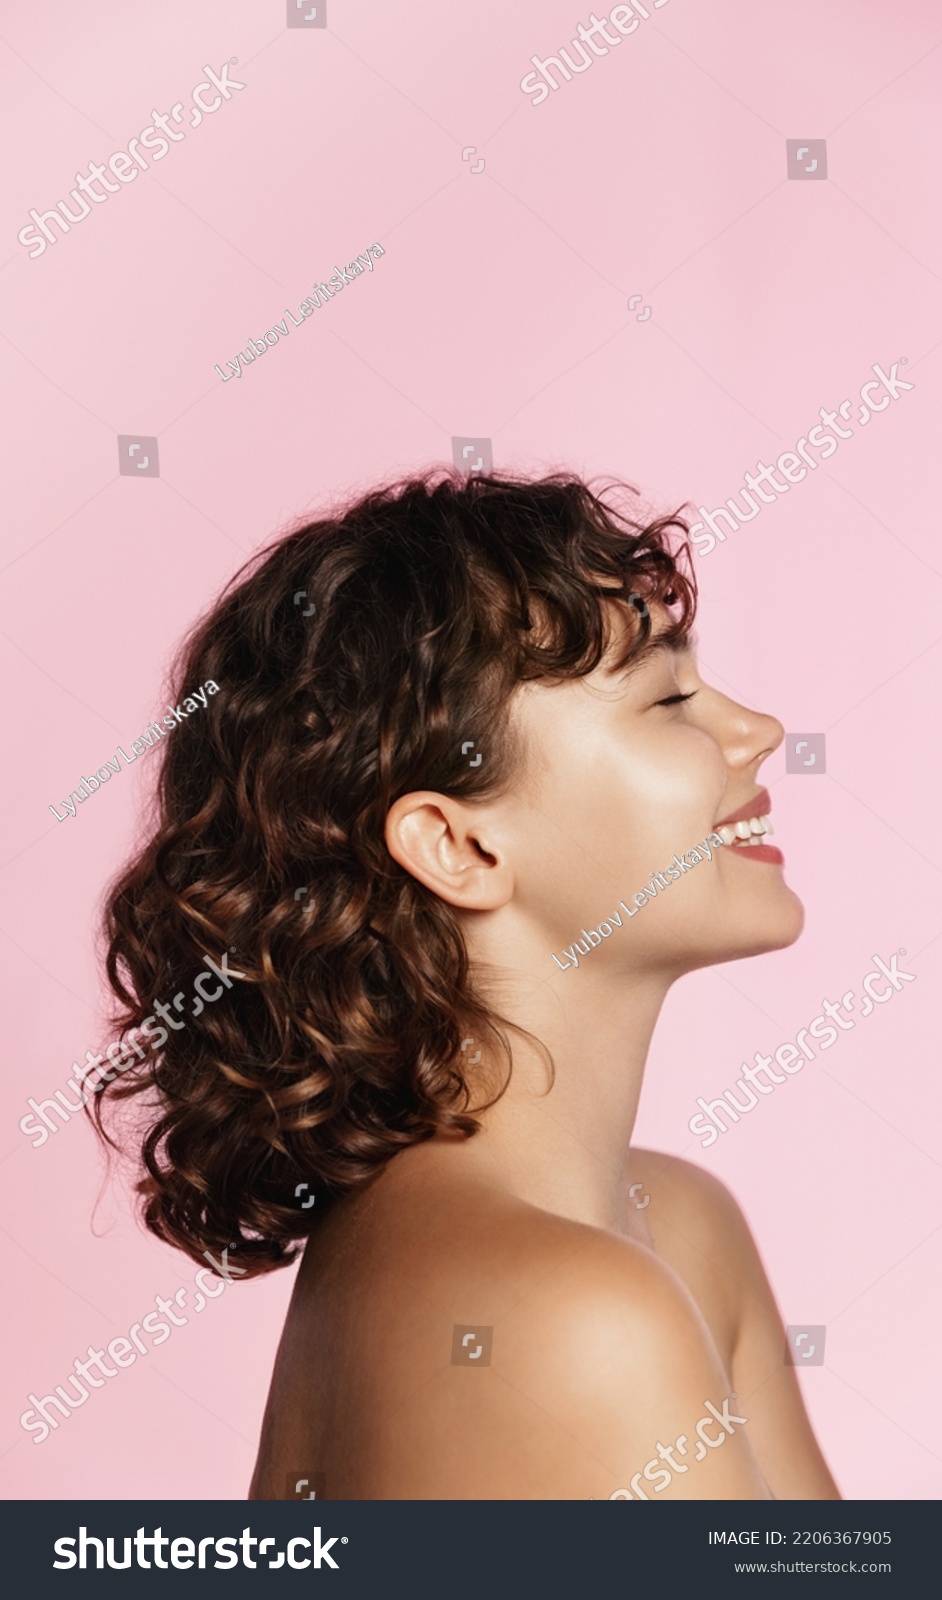 Profile photo of young female model, curly hair, closed eyes, laughing, advertising of skin care treatment, cosmetic and spa product on pink background. #2206367905